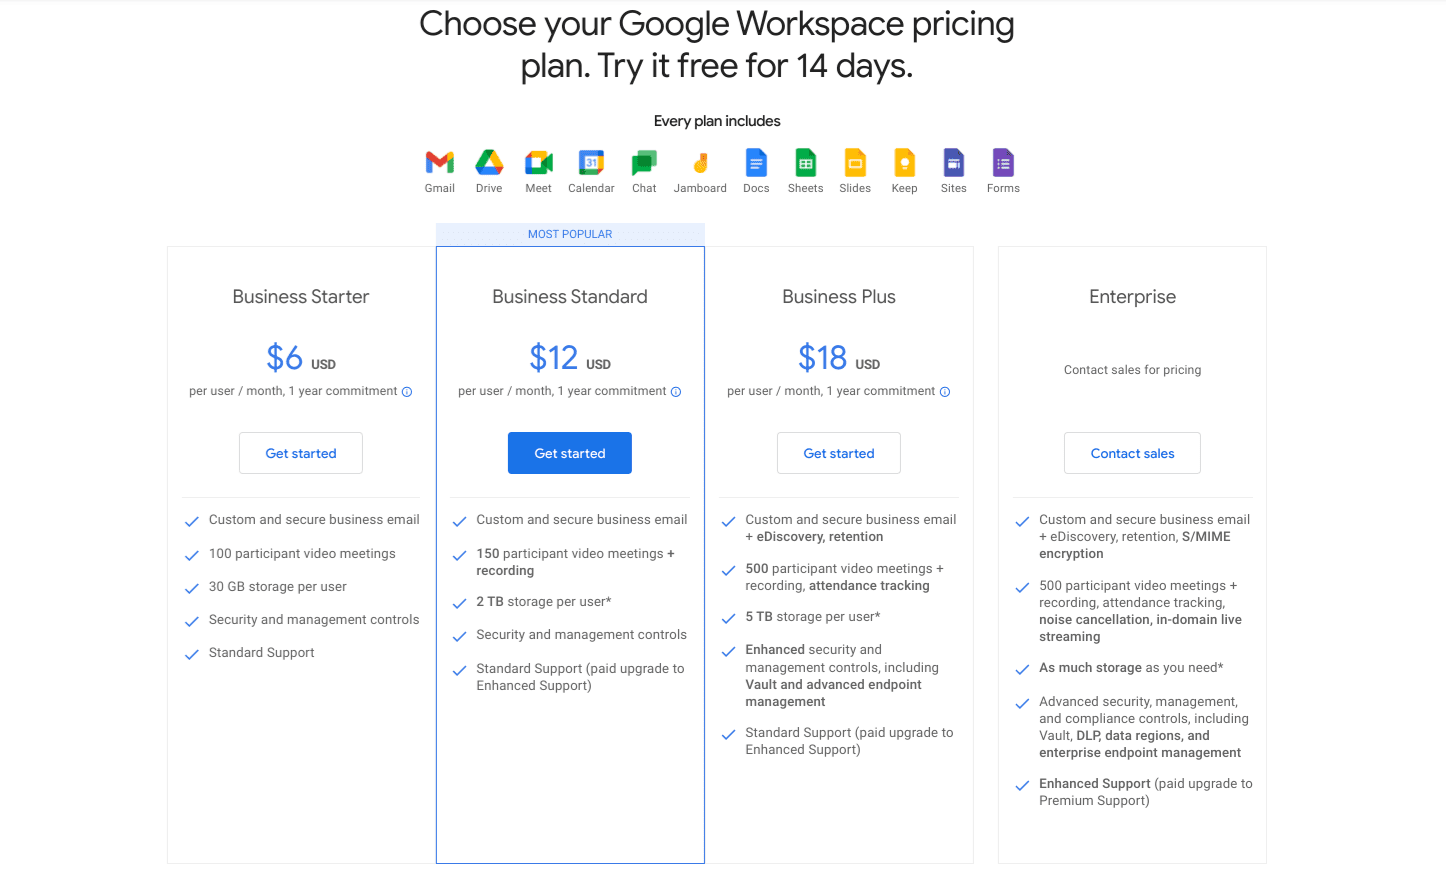 Pricing plans of Google Workspace